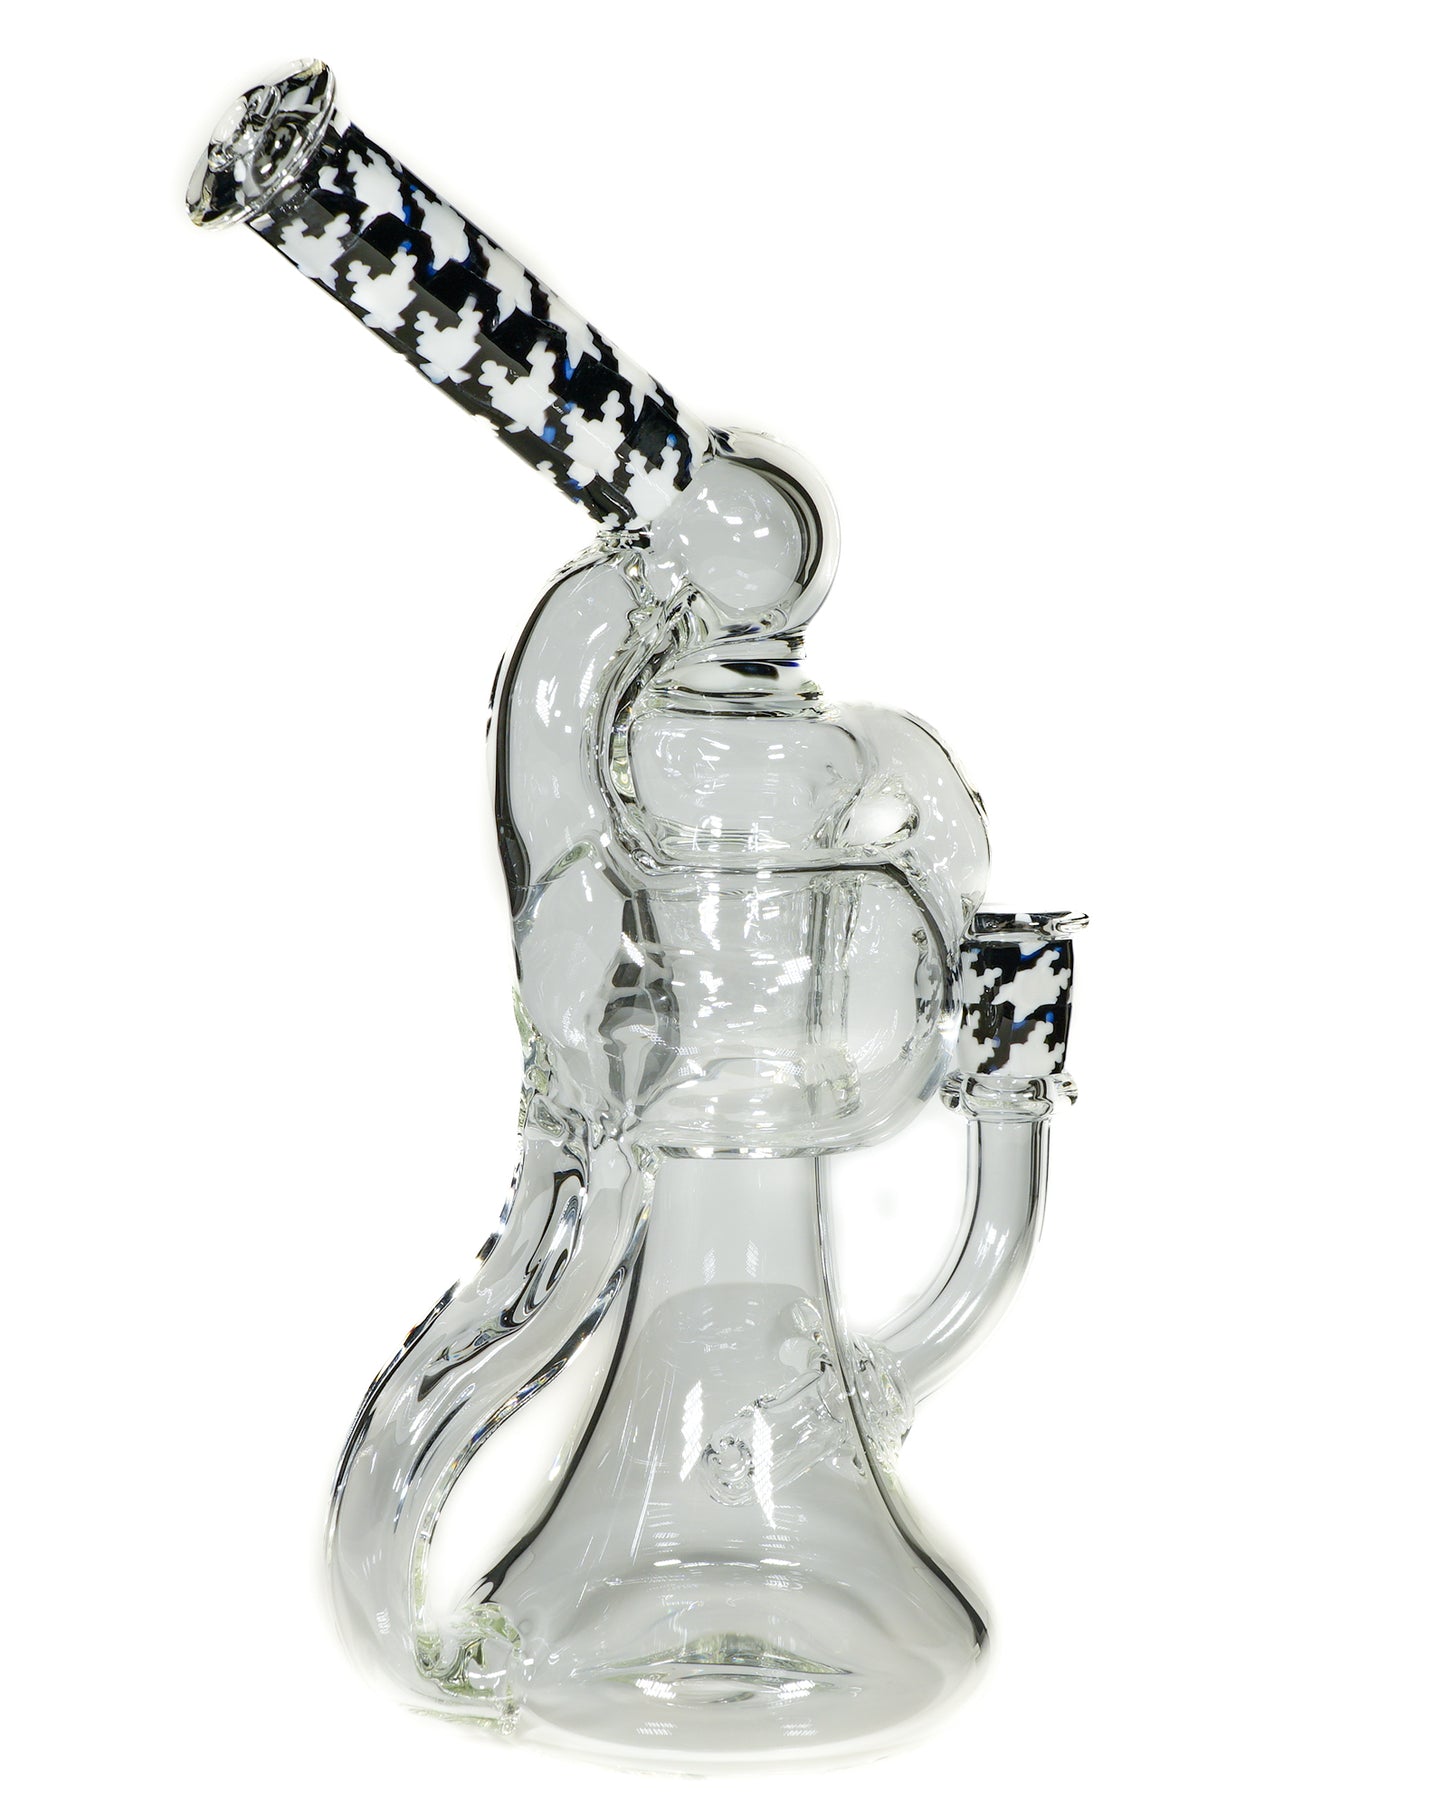 Black and White Houndstooth Ring Toss Recycler